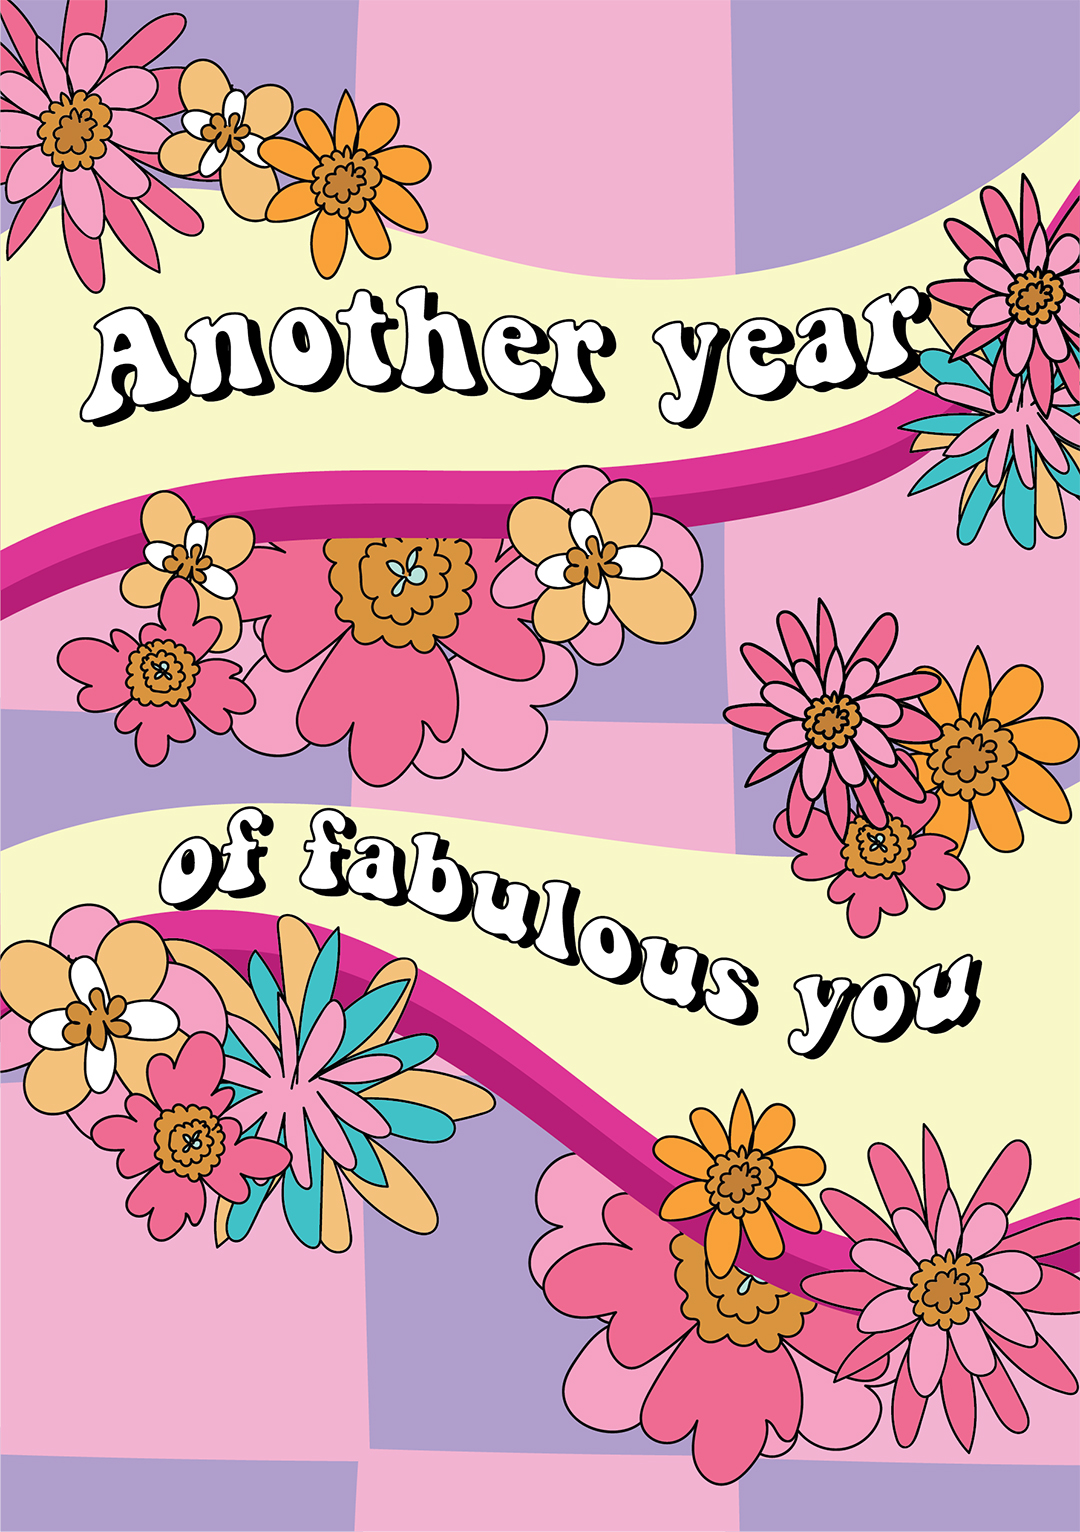 Another Year of Fabulous You - Birthday Card